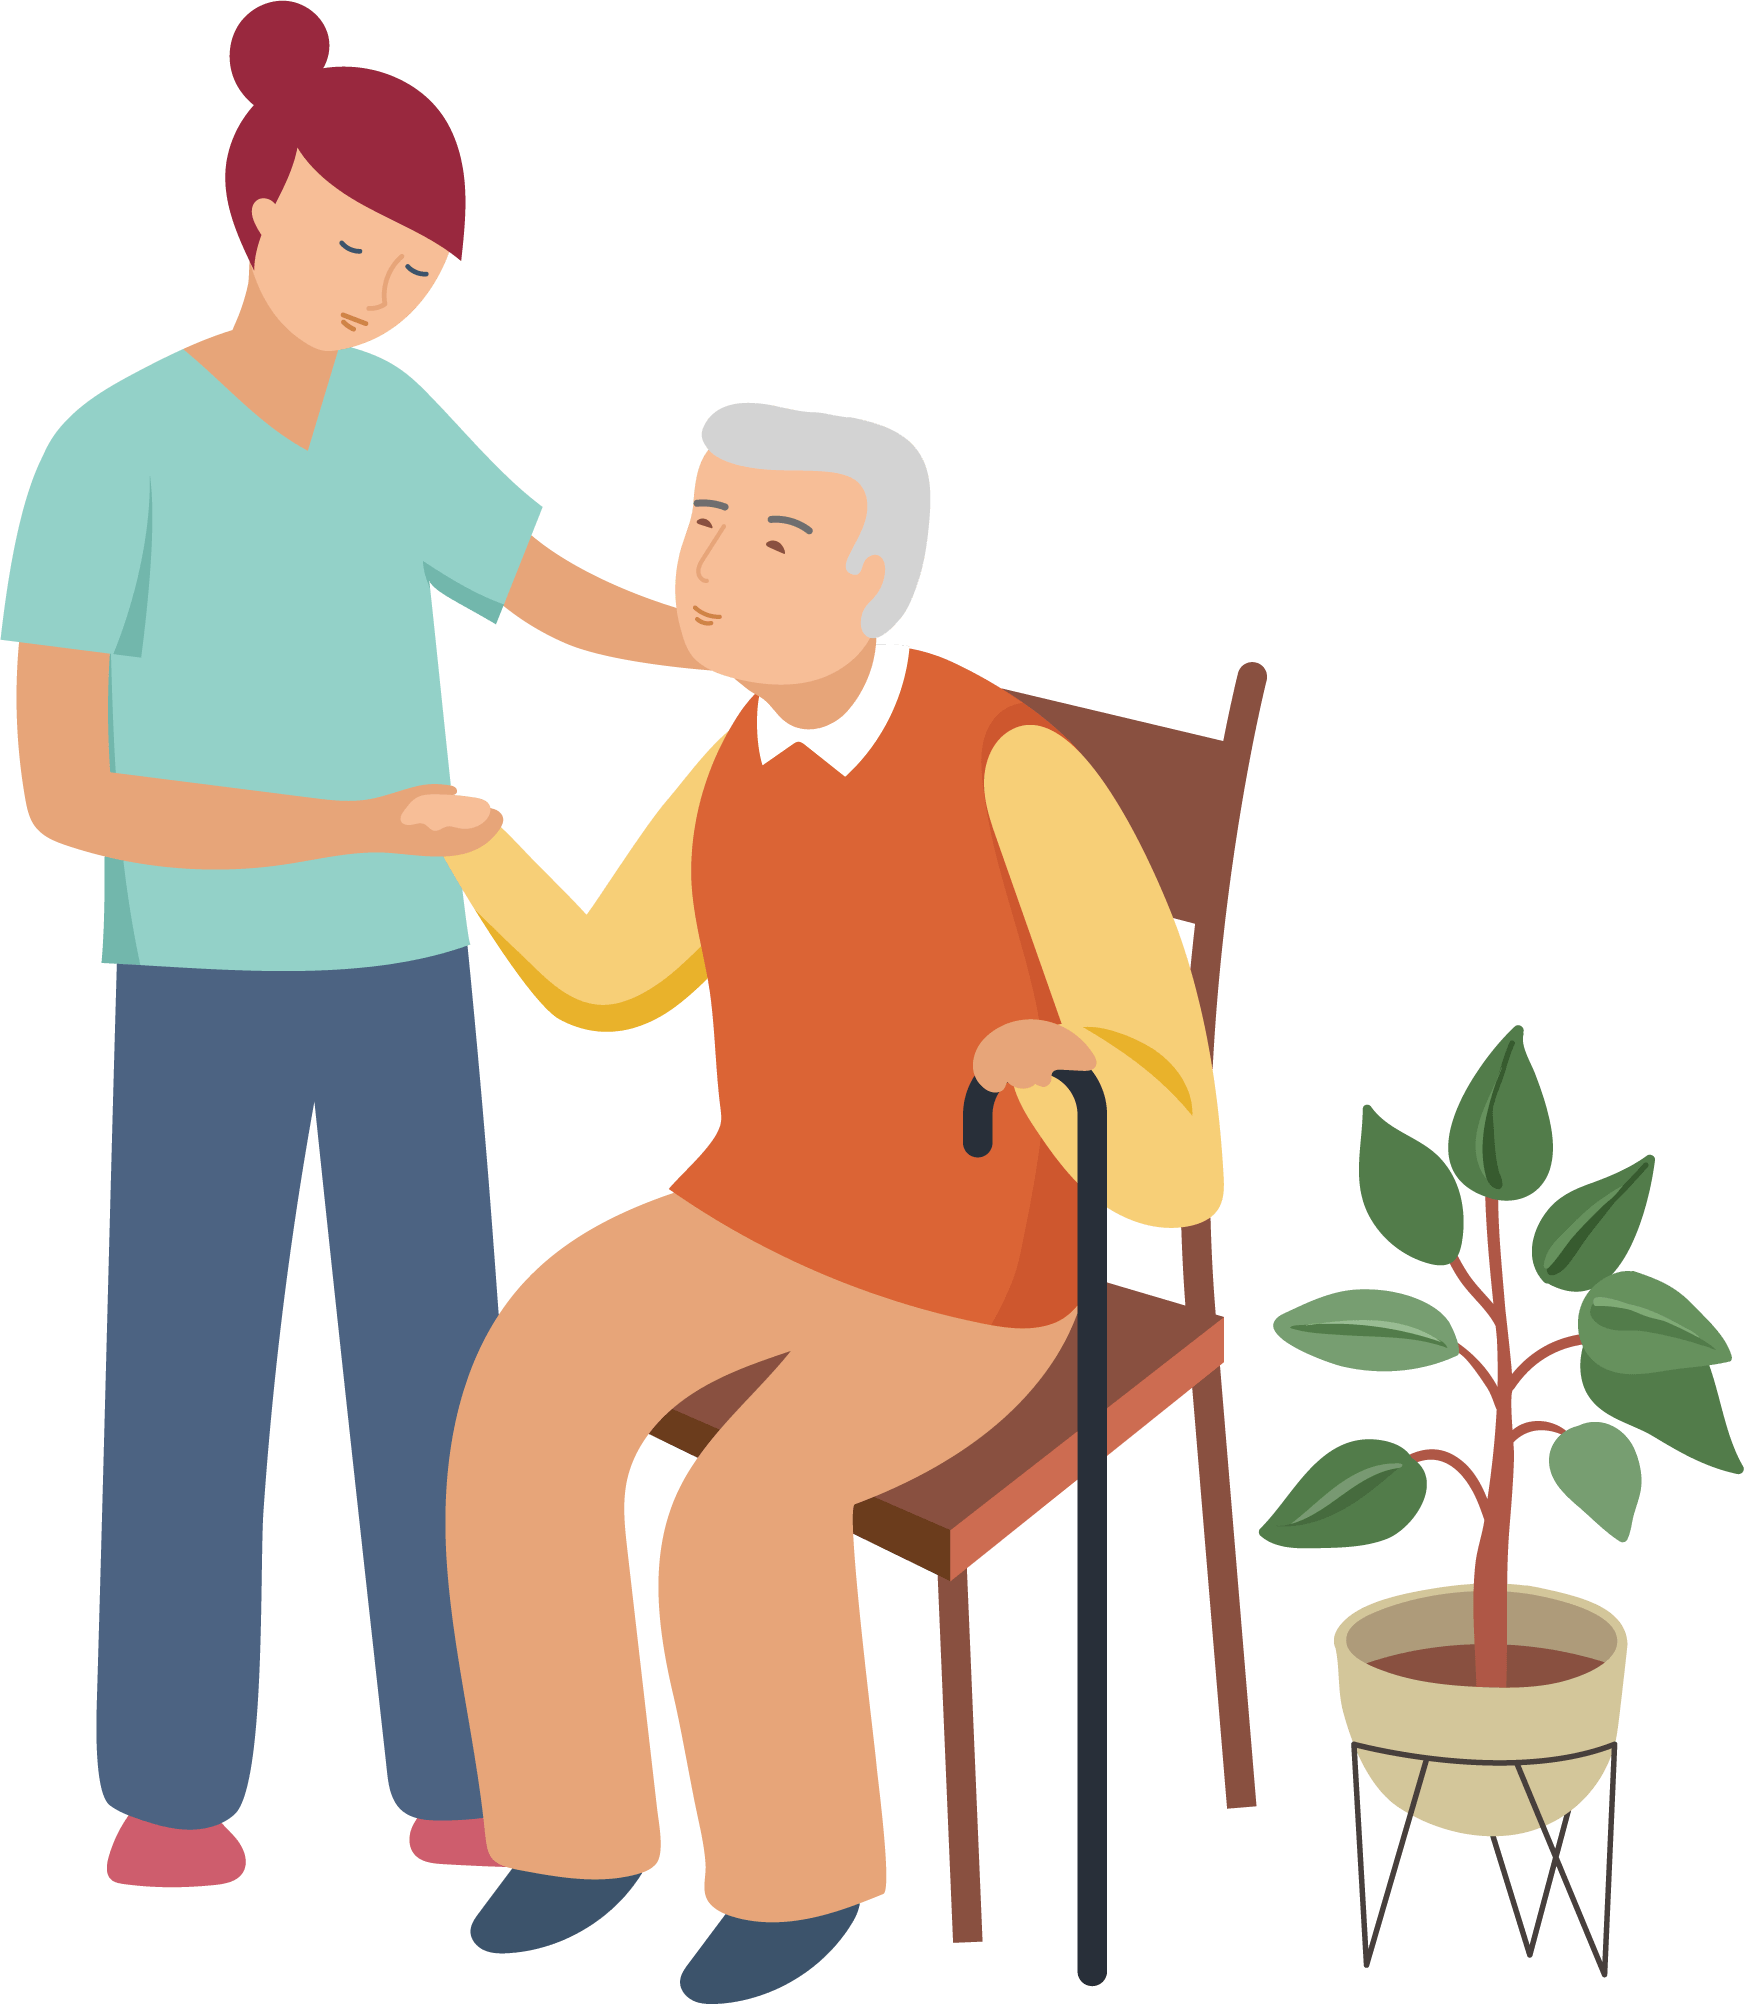 graphic of caregiver carrying a paper bag full of groceries for senior patient